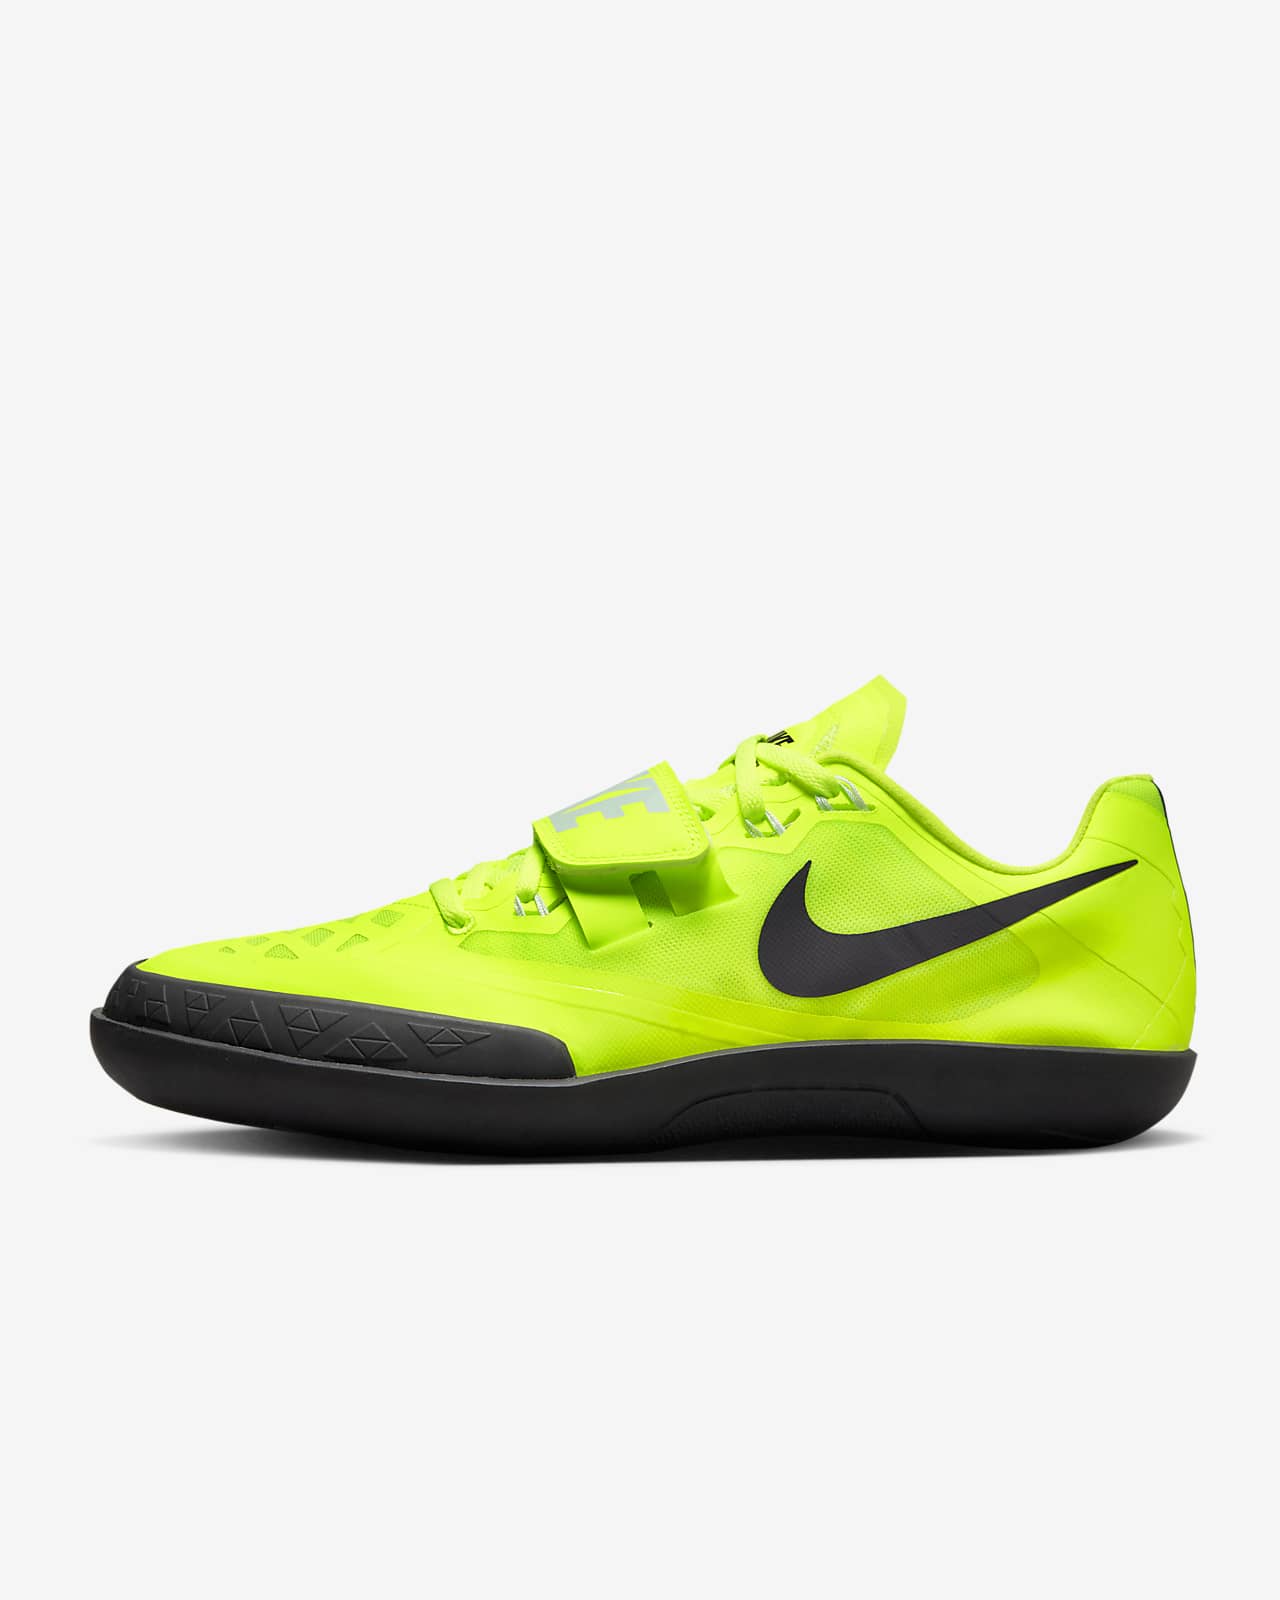 Nike Zoom Sd Track And Field Shoes | lupon.gov.ph